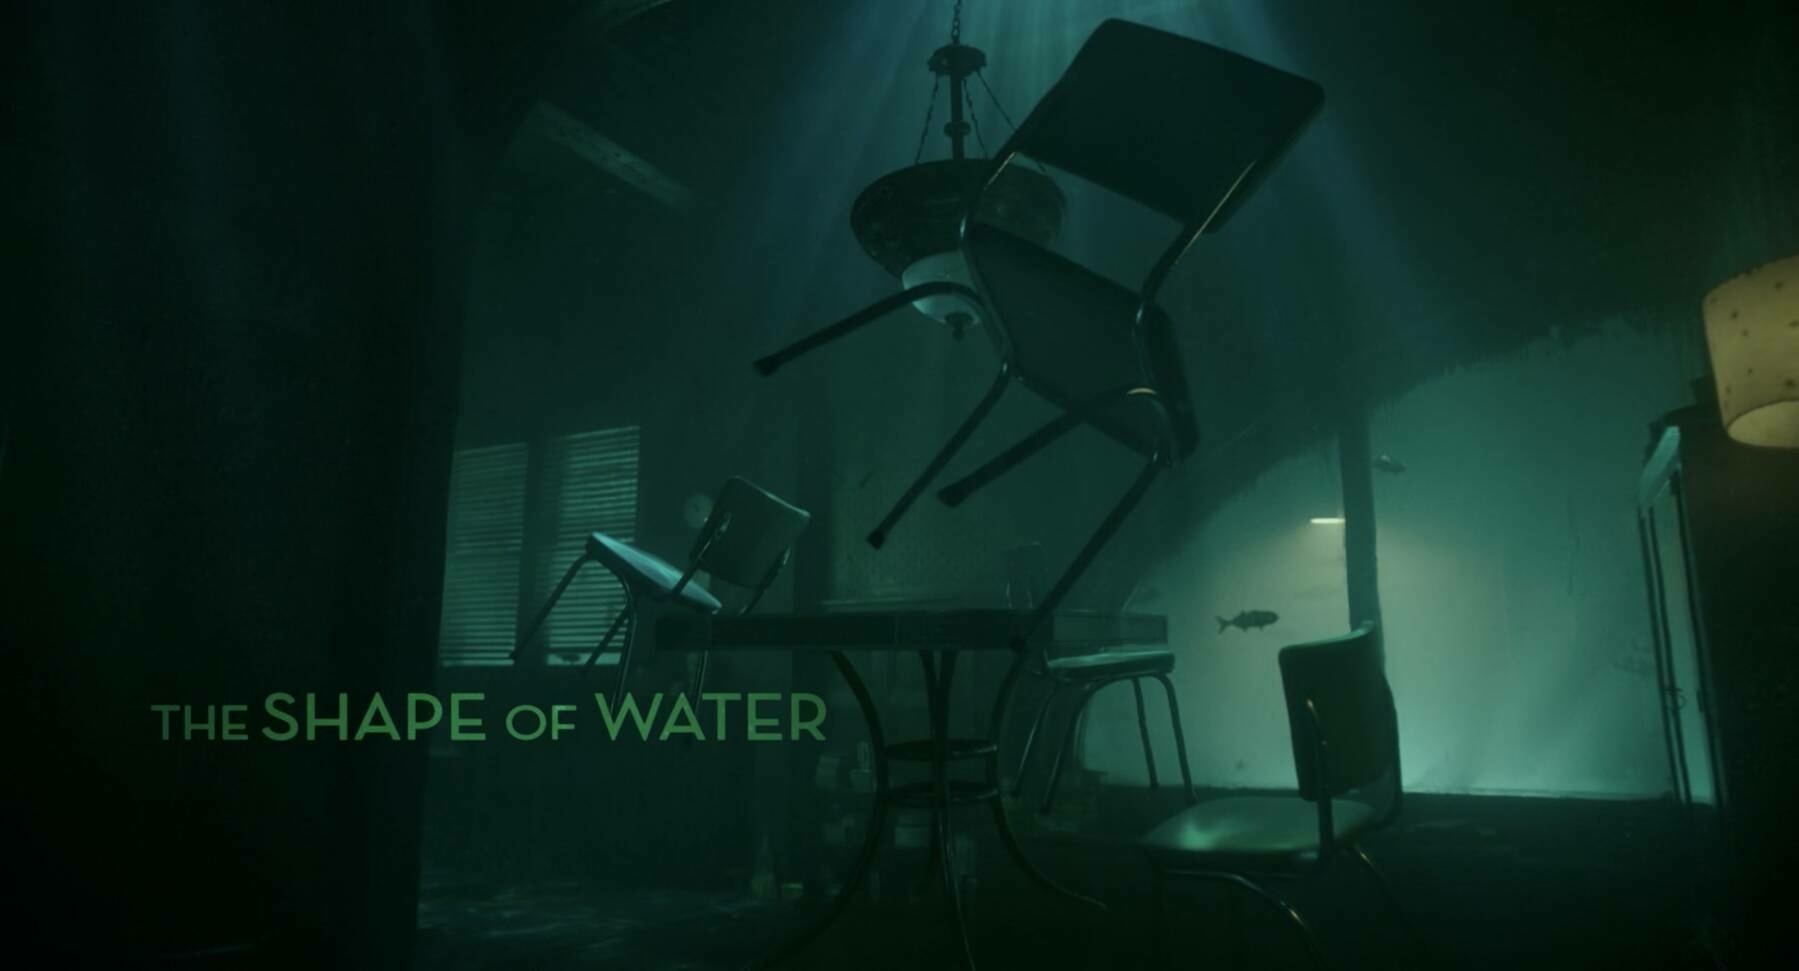 The title card for the film, The Shape of Water.